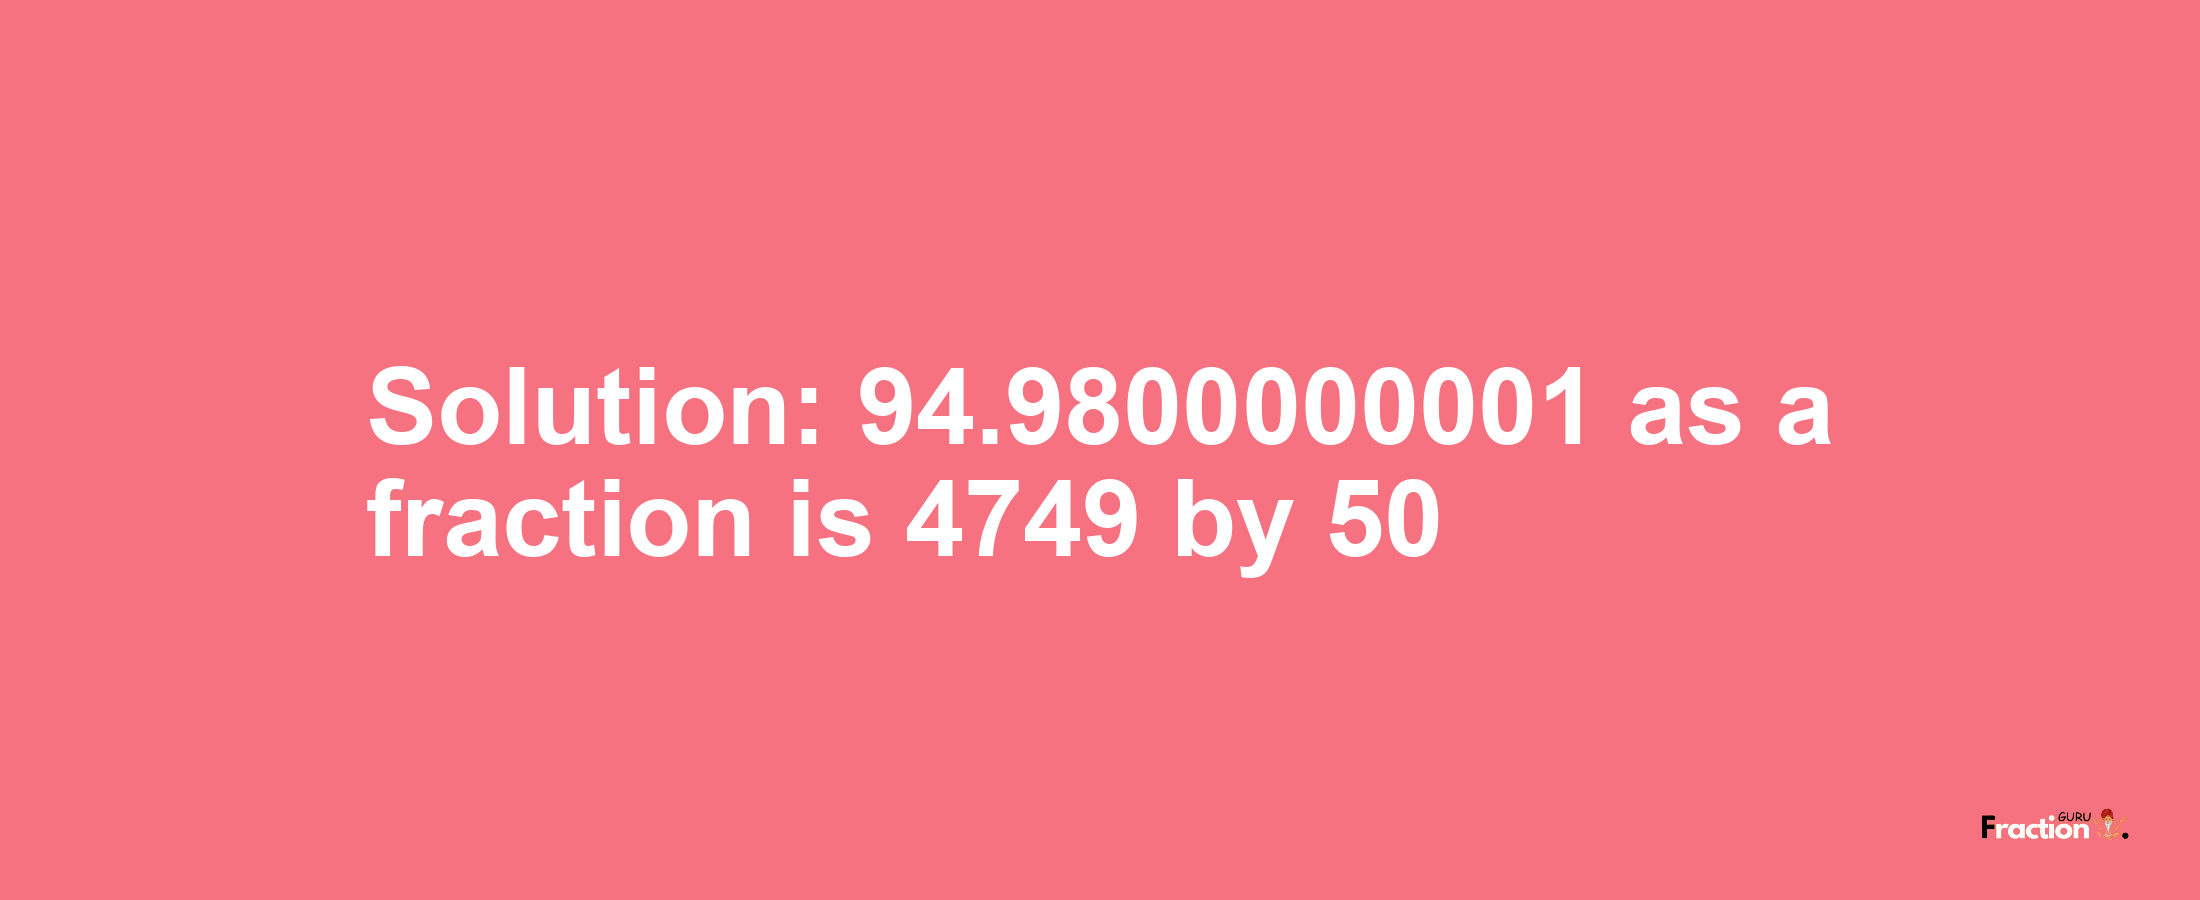 Solution:94.9800000001 as a fraction is 4749/50